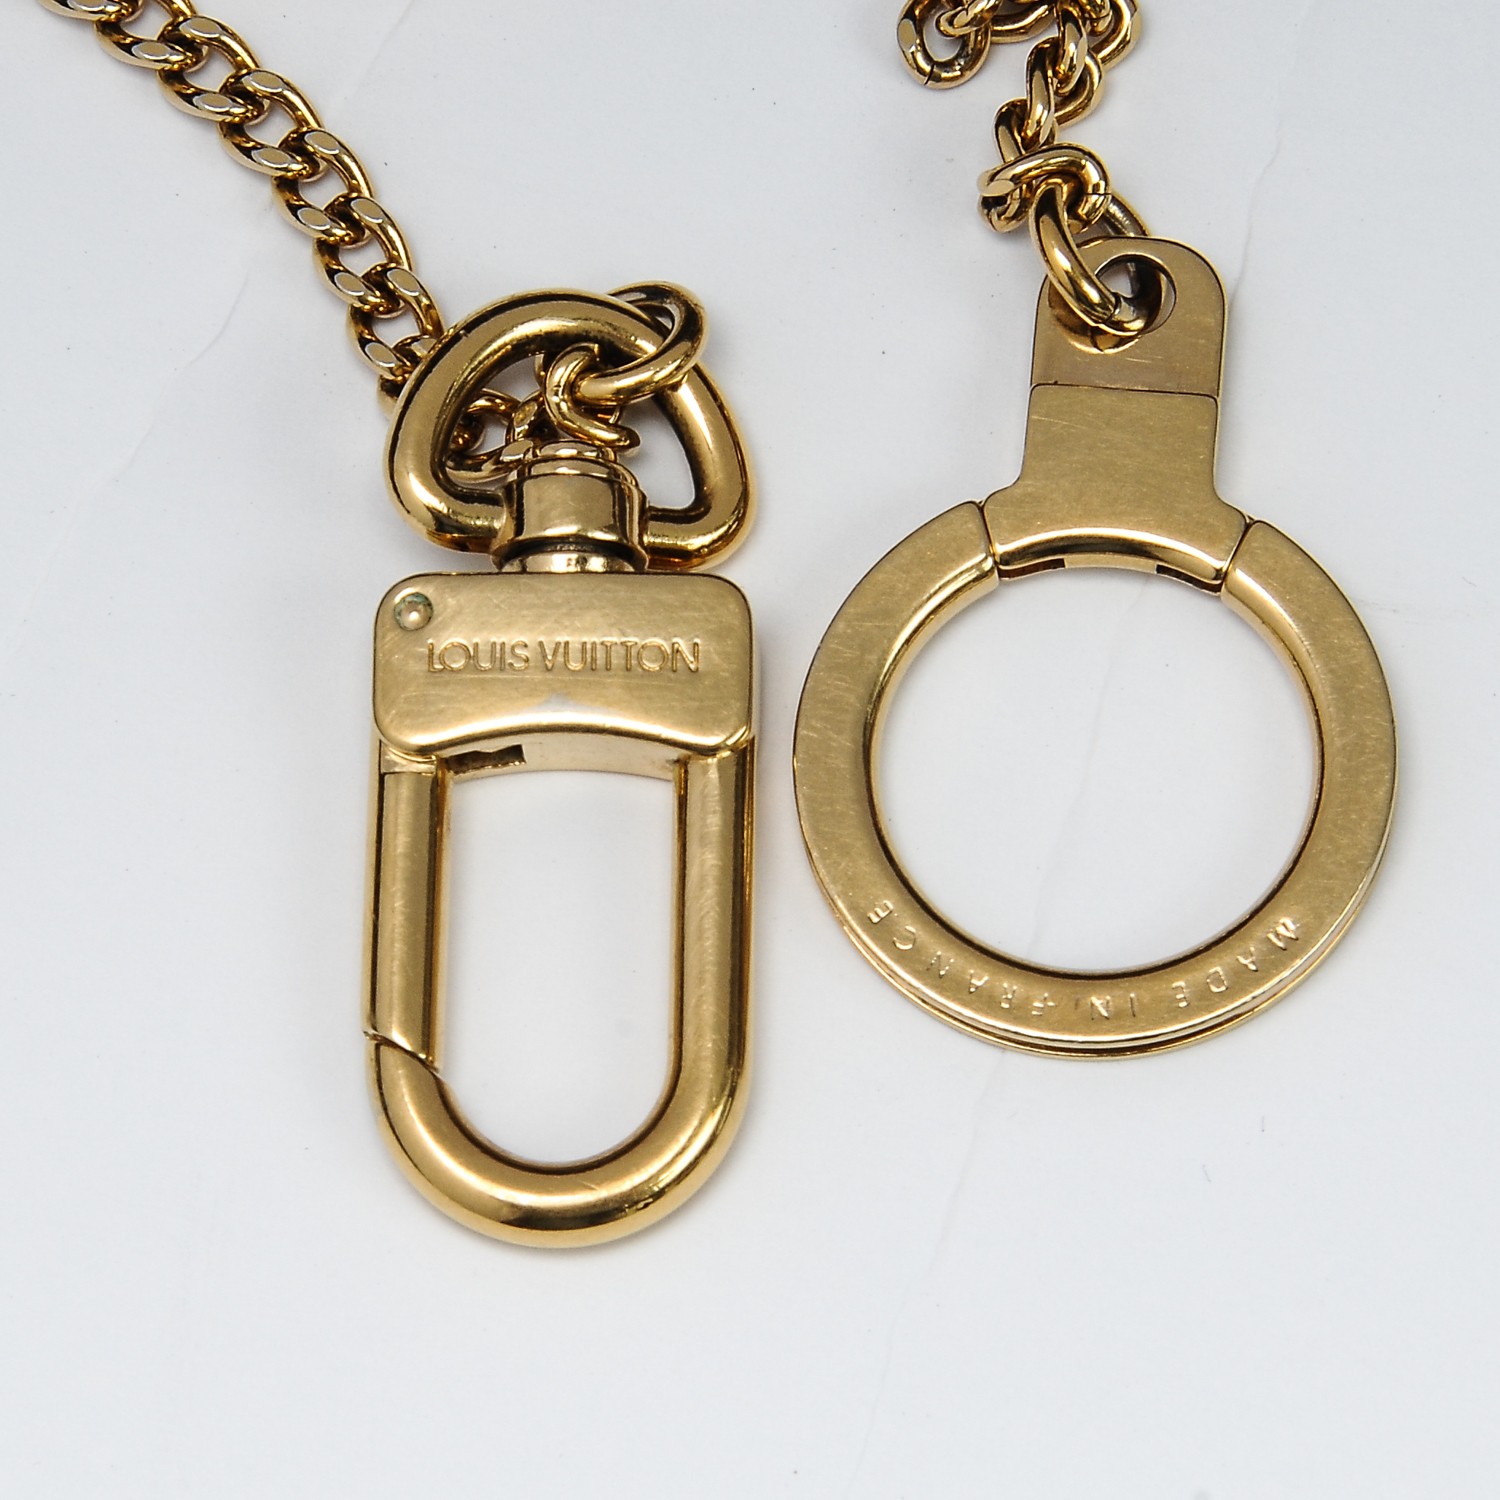 Louis Vuitton Bag Chain In Women's Key Chains, Rings & Finders for sale